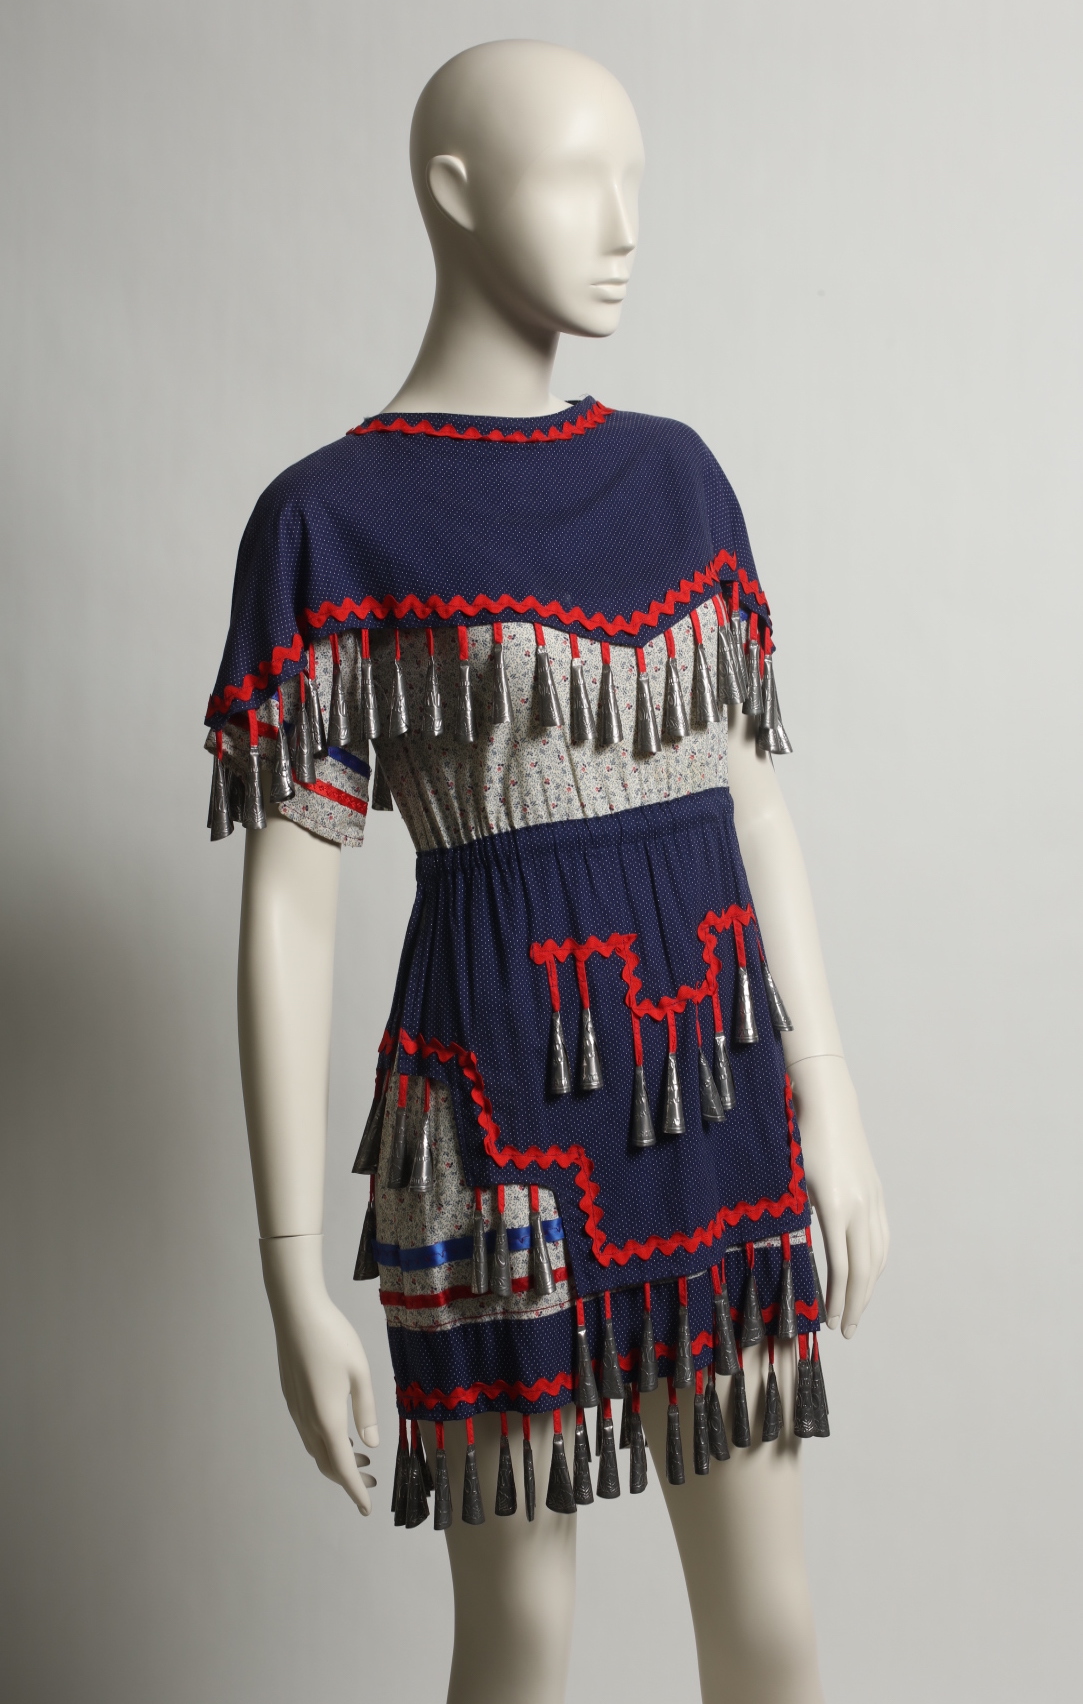 Fashion jingle dress by an unknown Native American designer, ca. 1950. UNT Texas Fashion Collection, Gift of Joy Losee. Photo courtesy of Brandon Nichols.